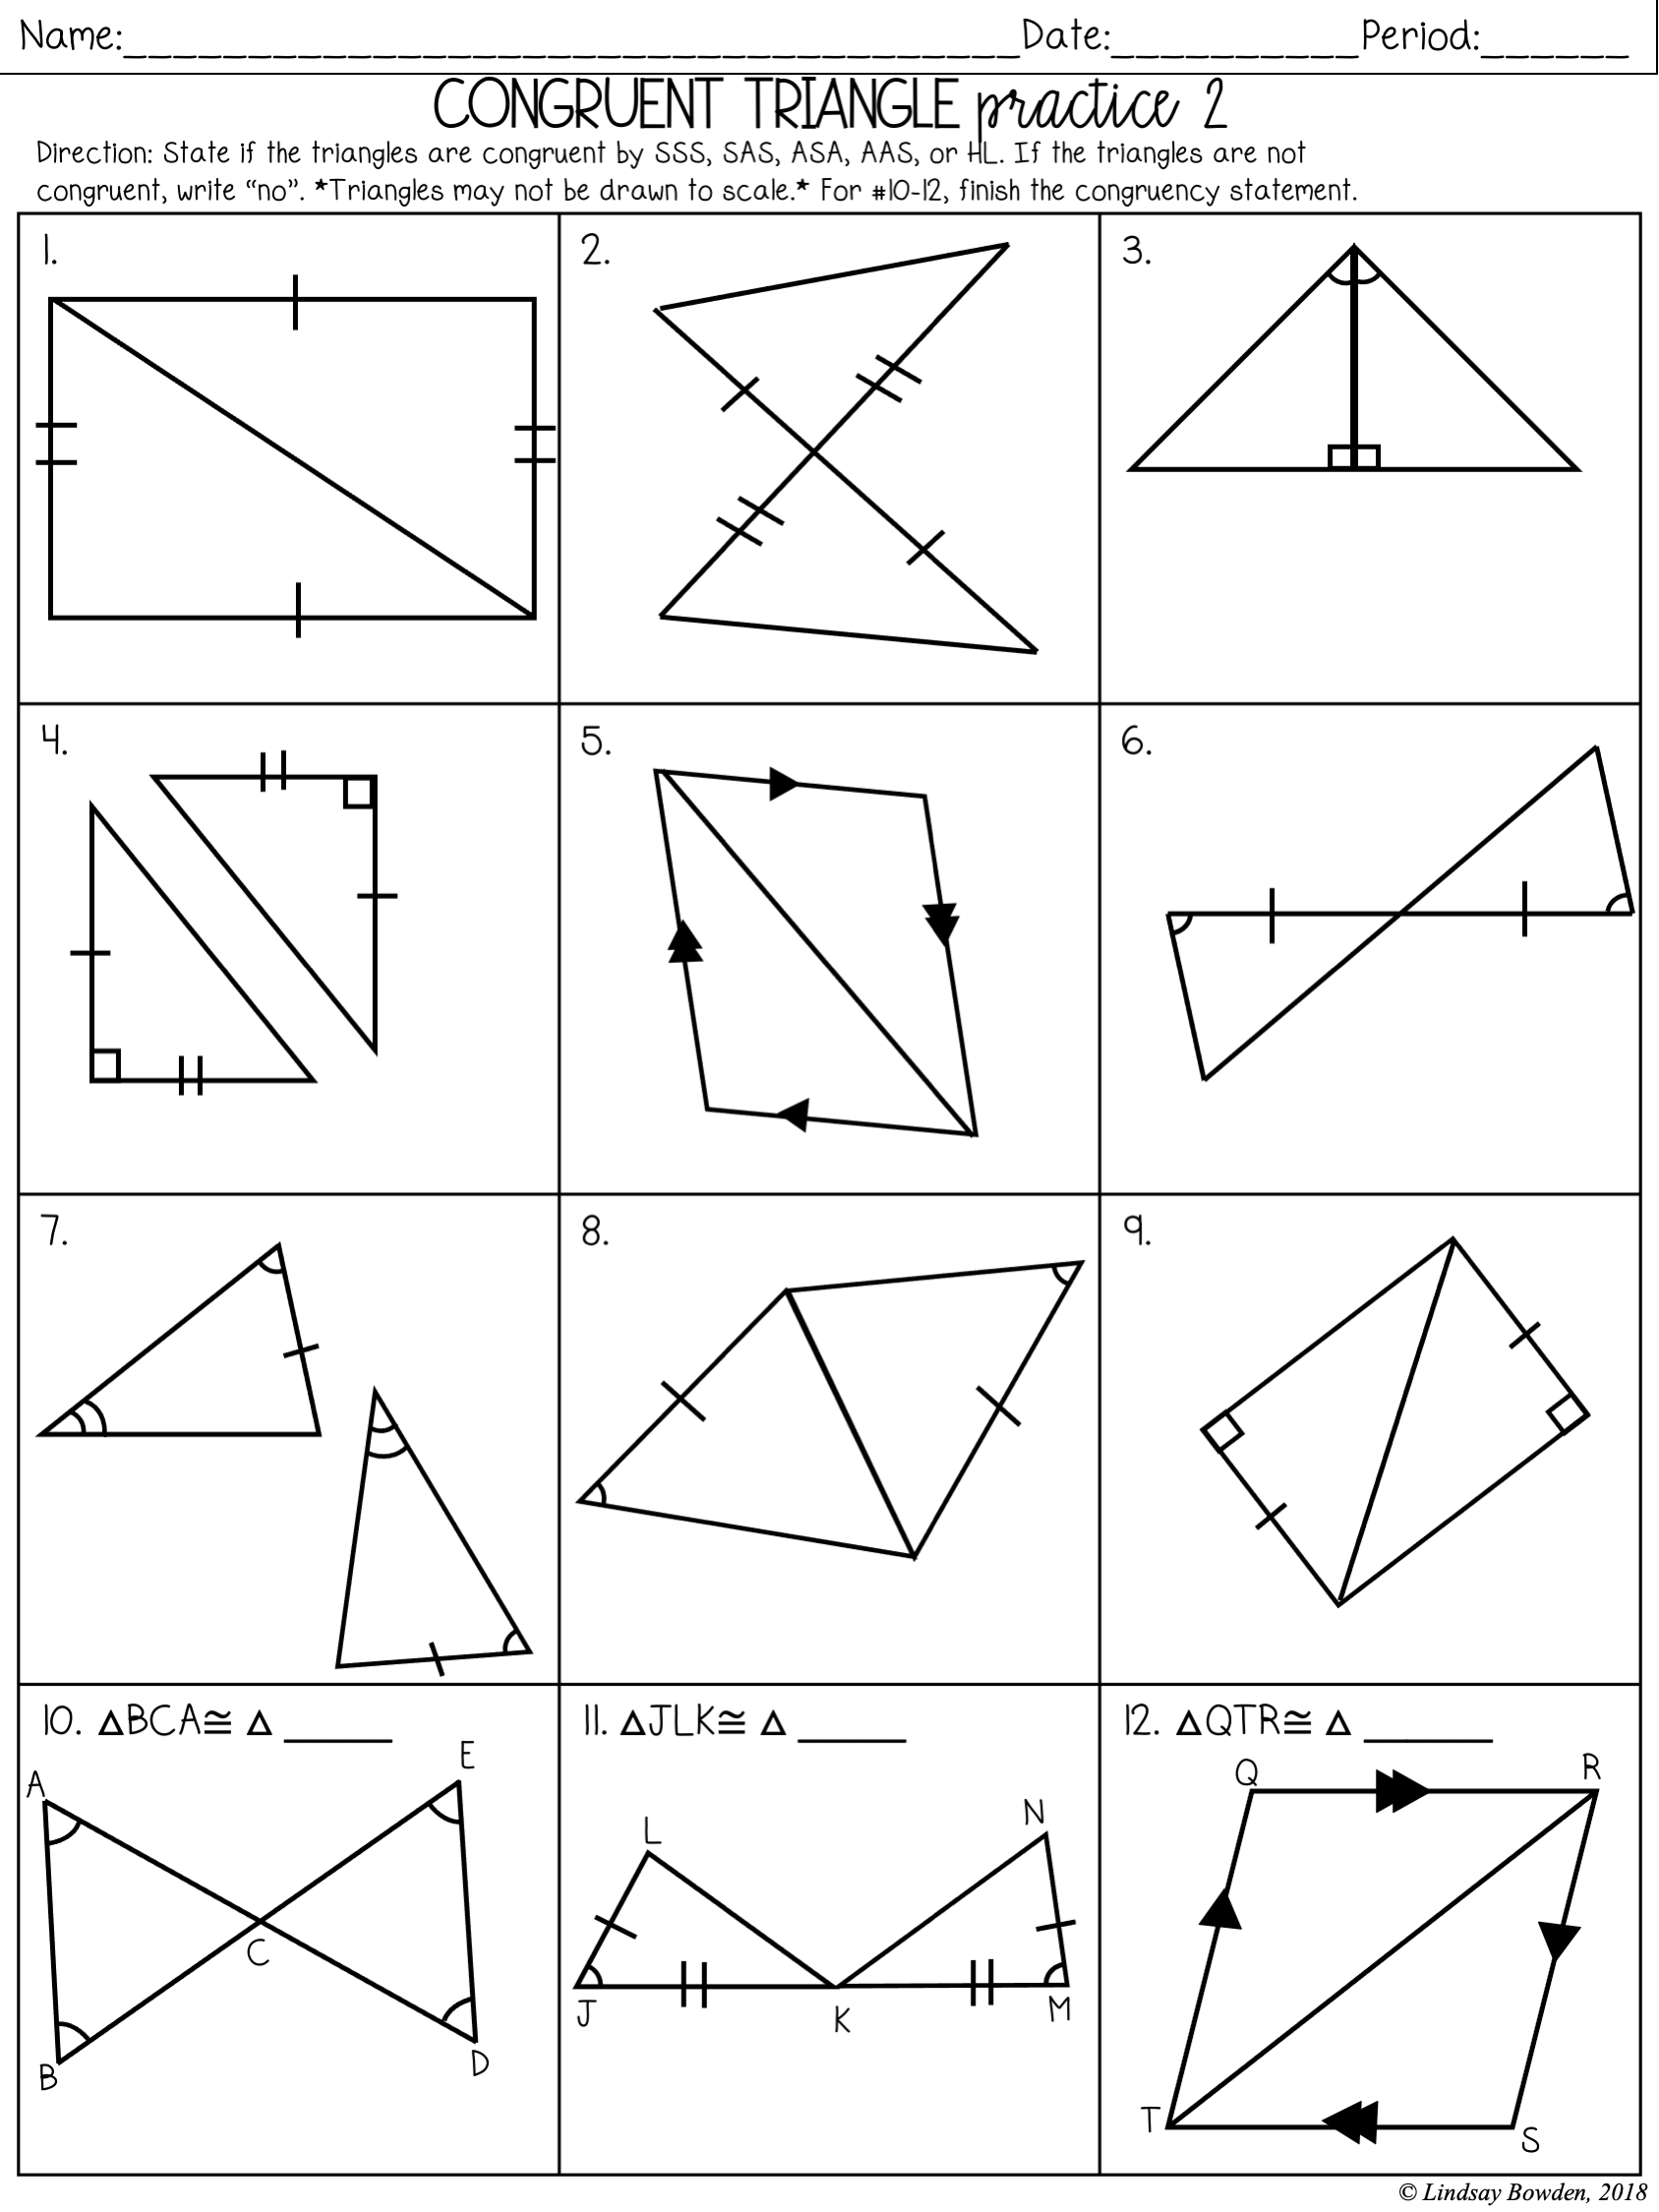 Congruent Triangles Notes and Worksheets - Lindsay Bowden With Regard To Congruent Triangles Worksheet Answer Key